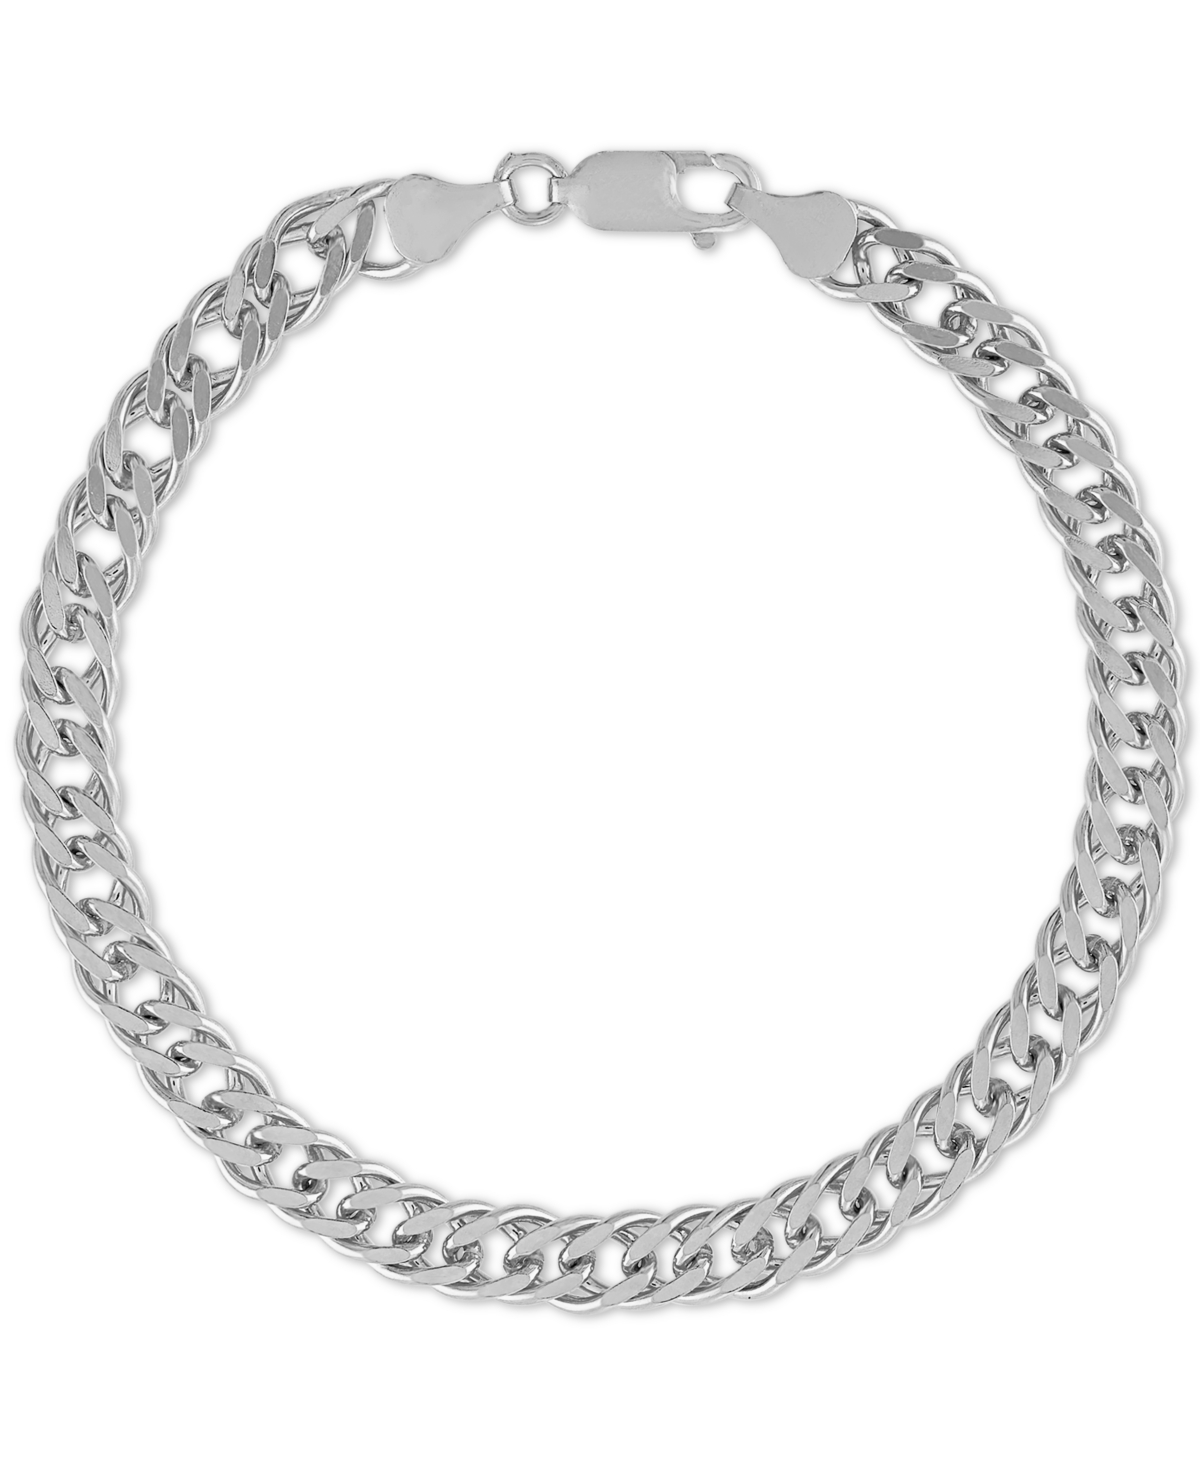 Esquire Men's Jewelry Fancy Curb Link Chain Bracelet in 14k Gold-Plated Sterling Silver, Created for Macy's